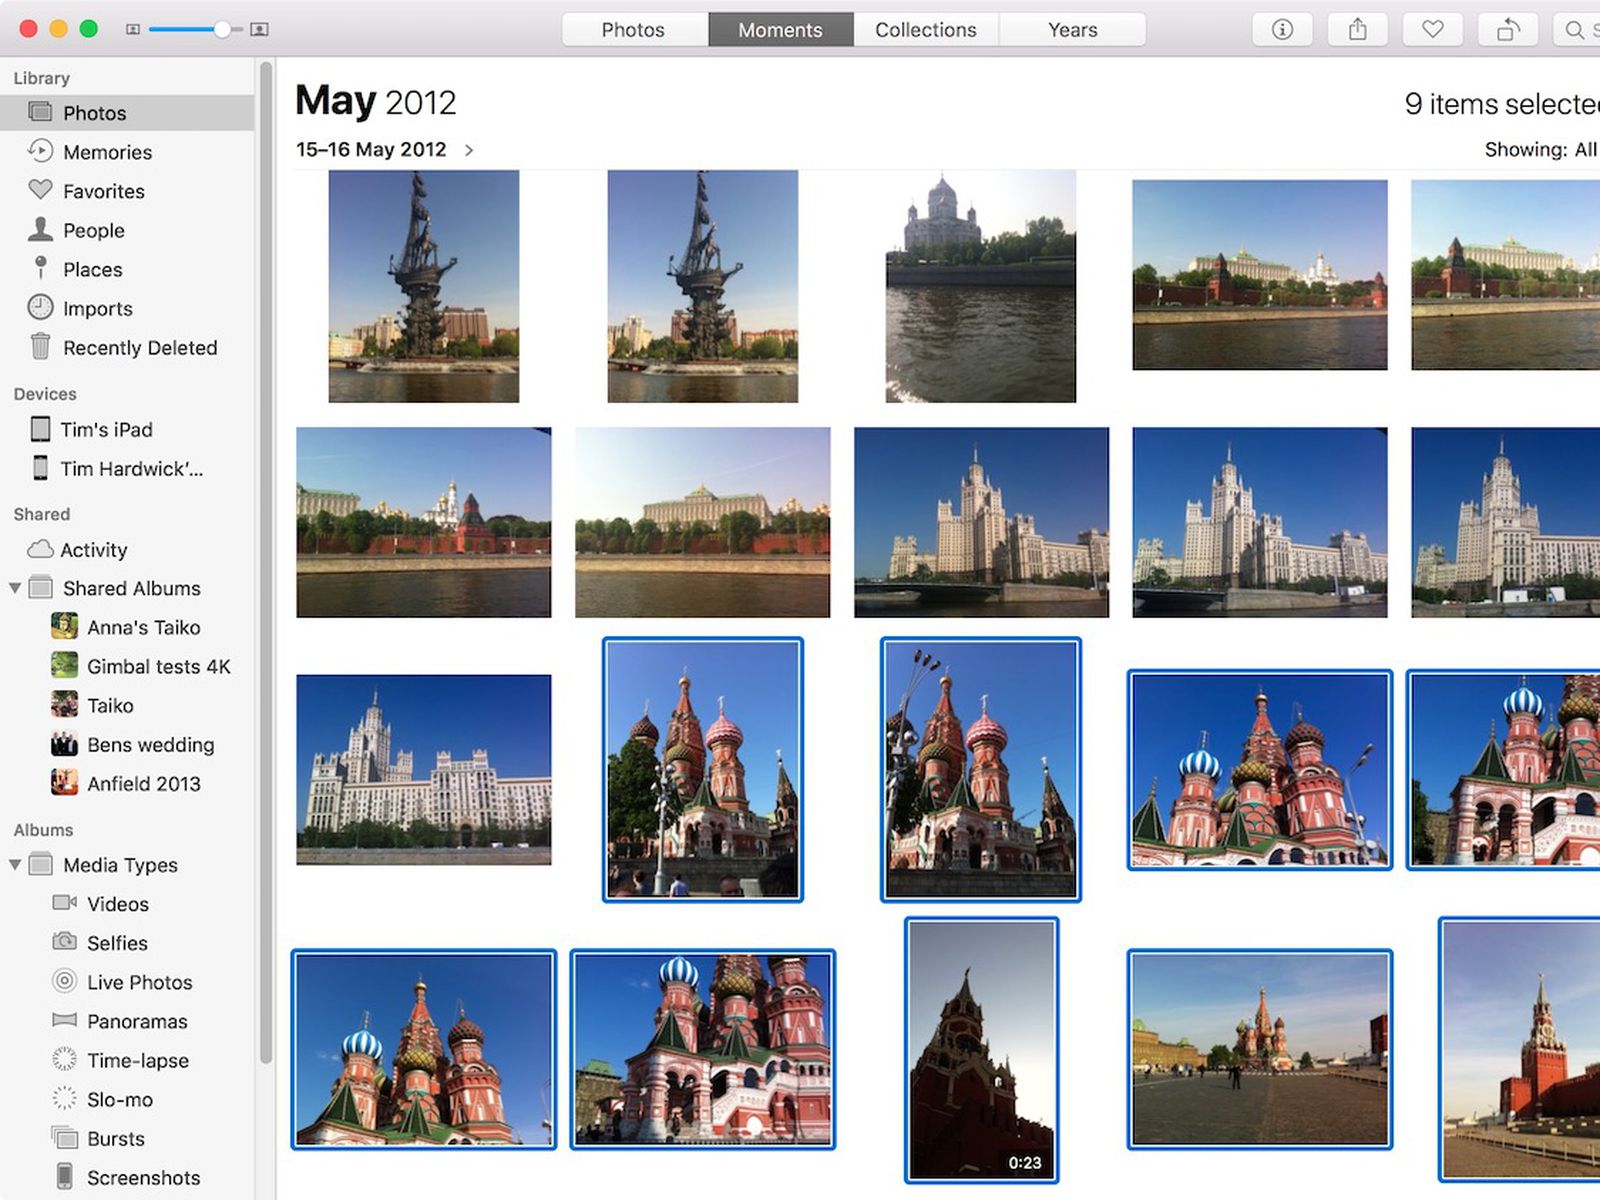 iphoto for mac pro download